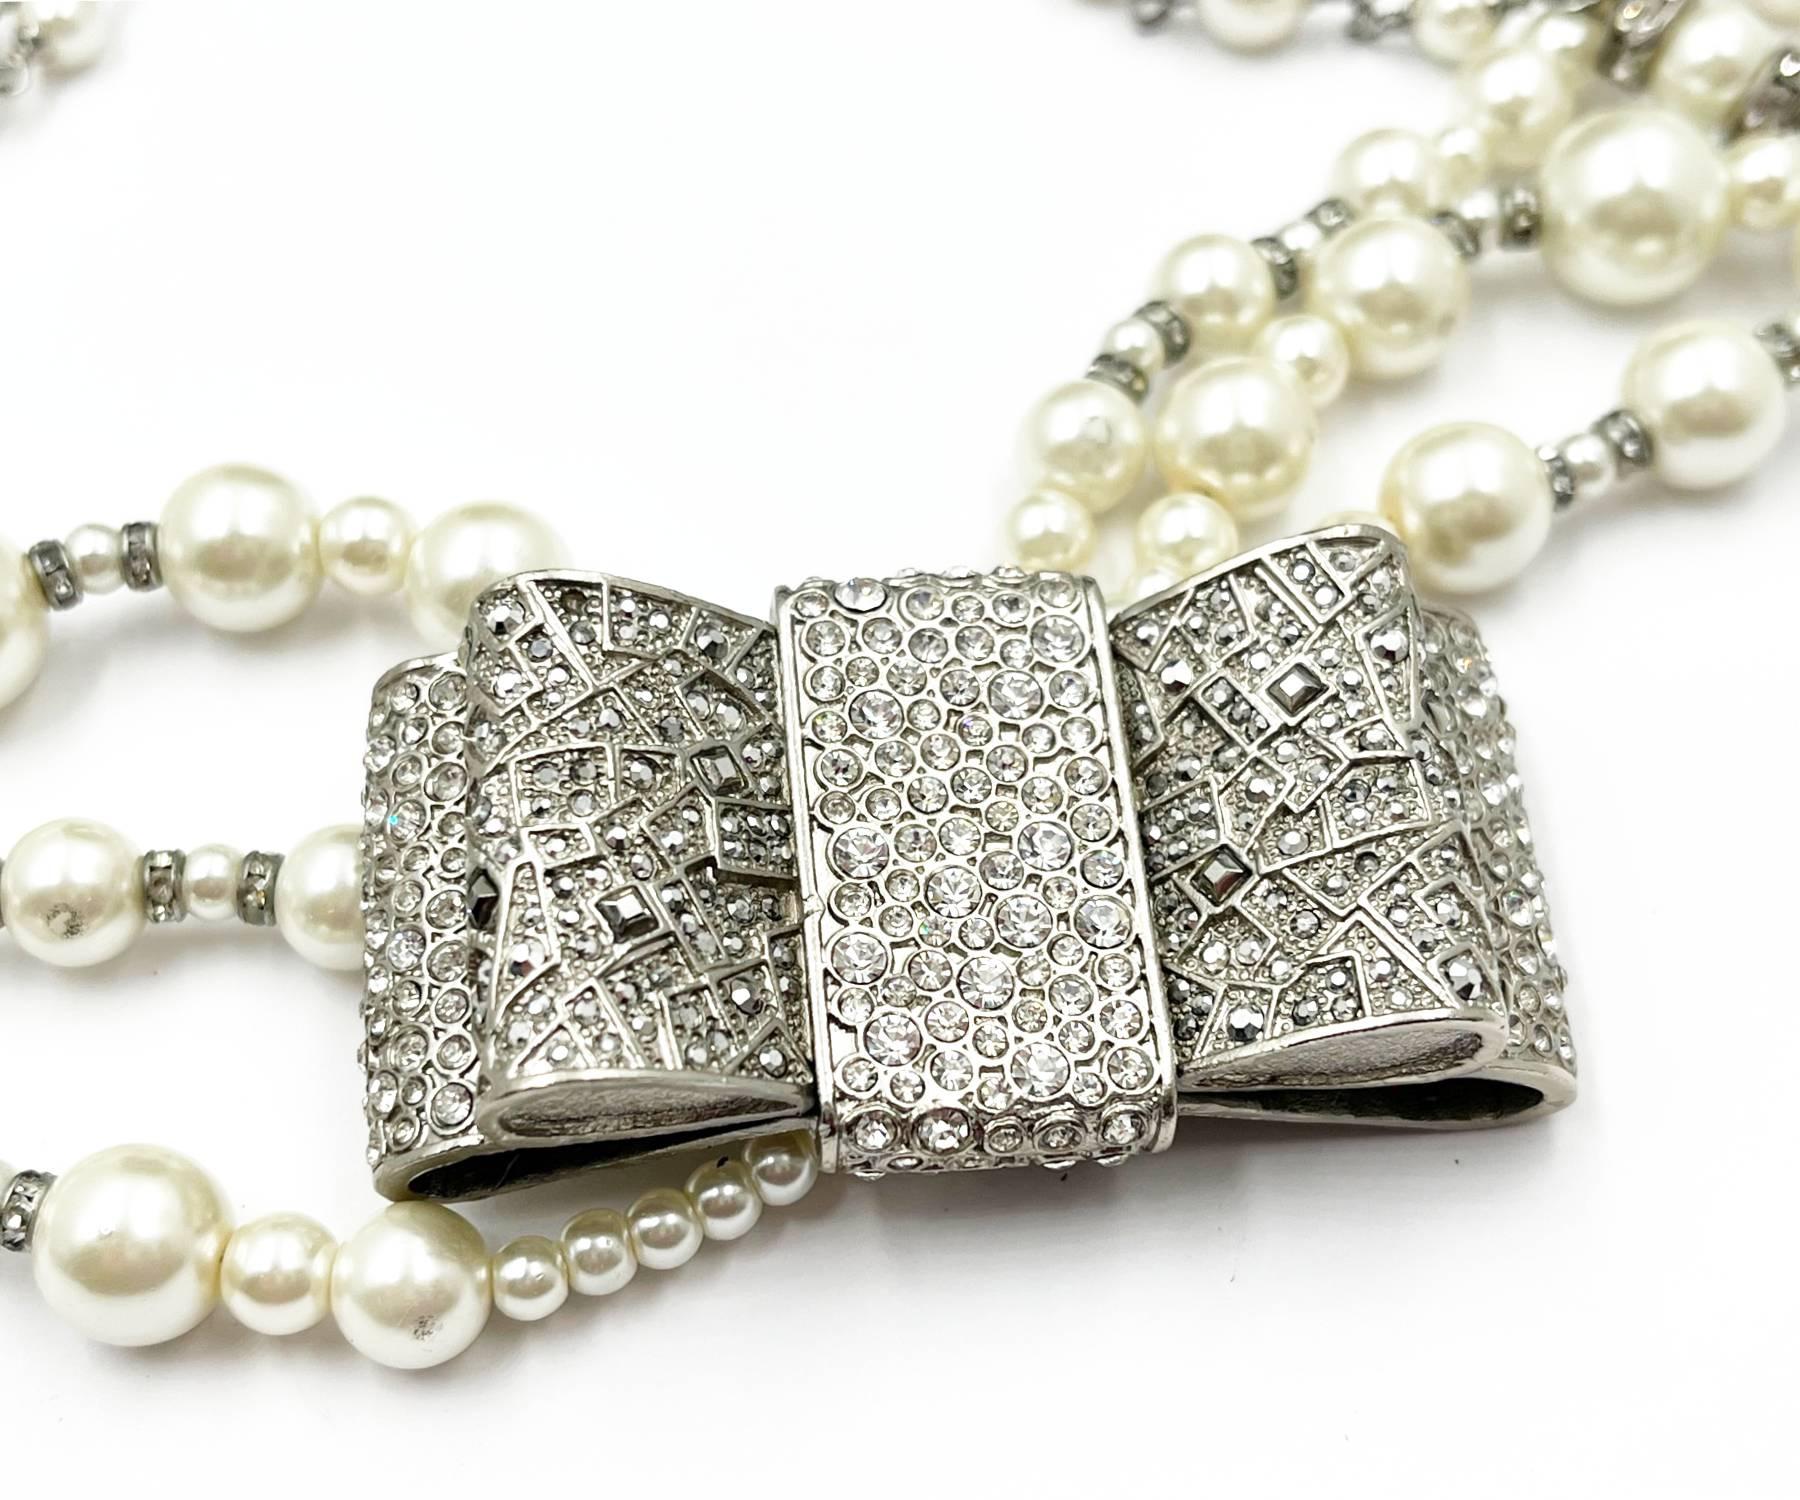 Chanel Rare Silver Large Bow Crystal 3 Strand Pearl Necklace

*The stamp is marked 13. It is a year of 2013 design.
*Made in France
*Comes with original box

-The chain is approximately 15″ to 17″ long.
-The pendant is approximately 1.3″ x 2.3″